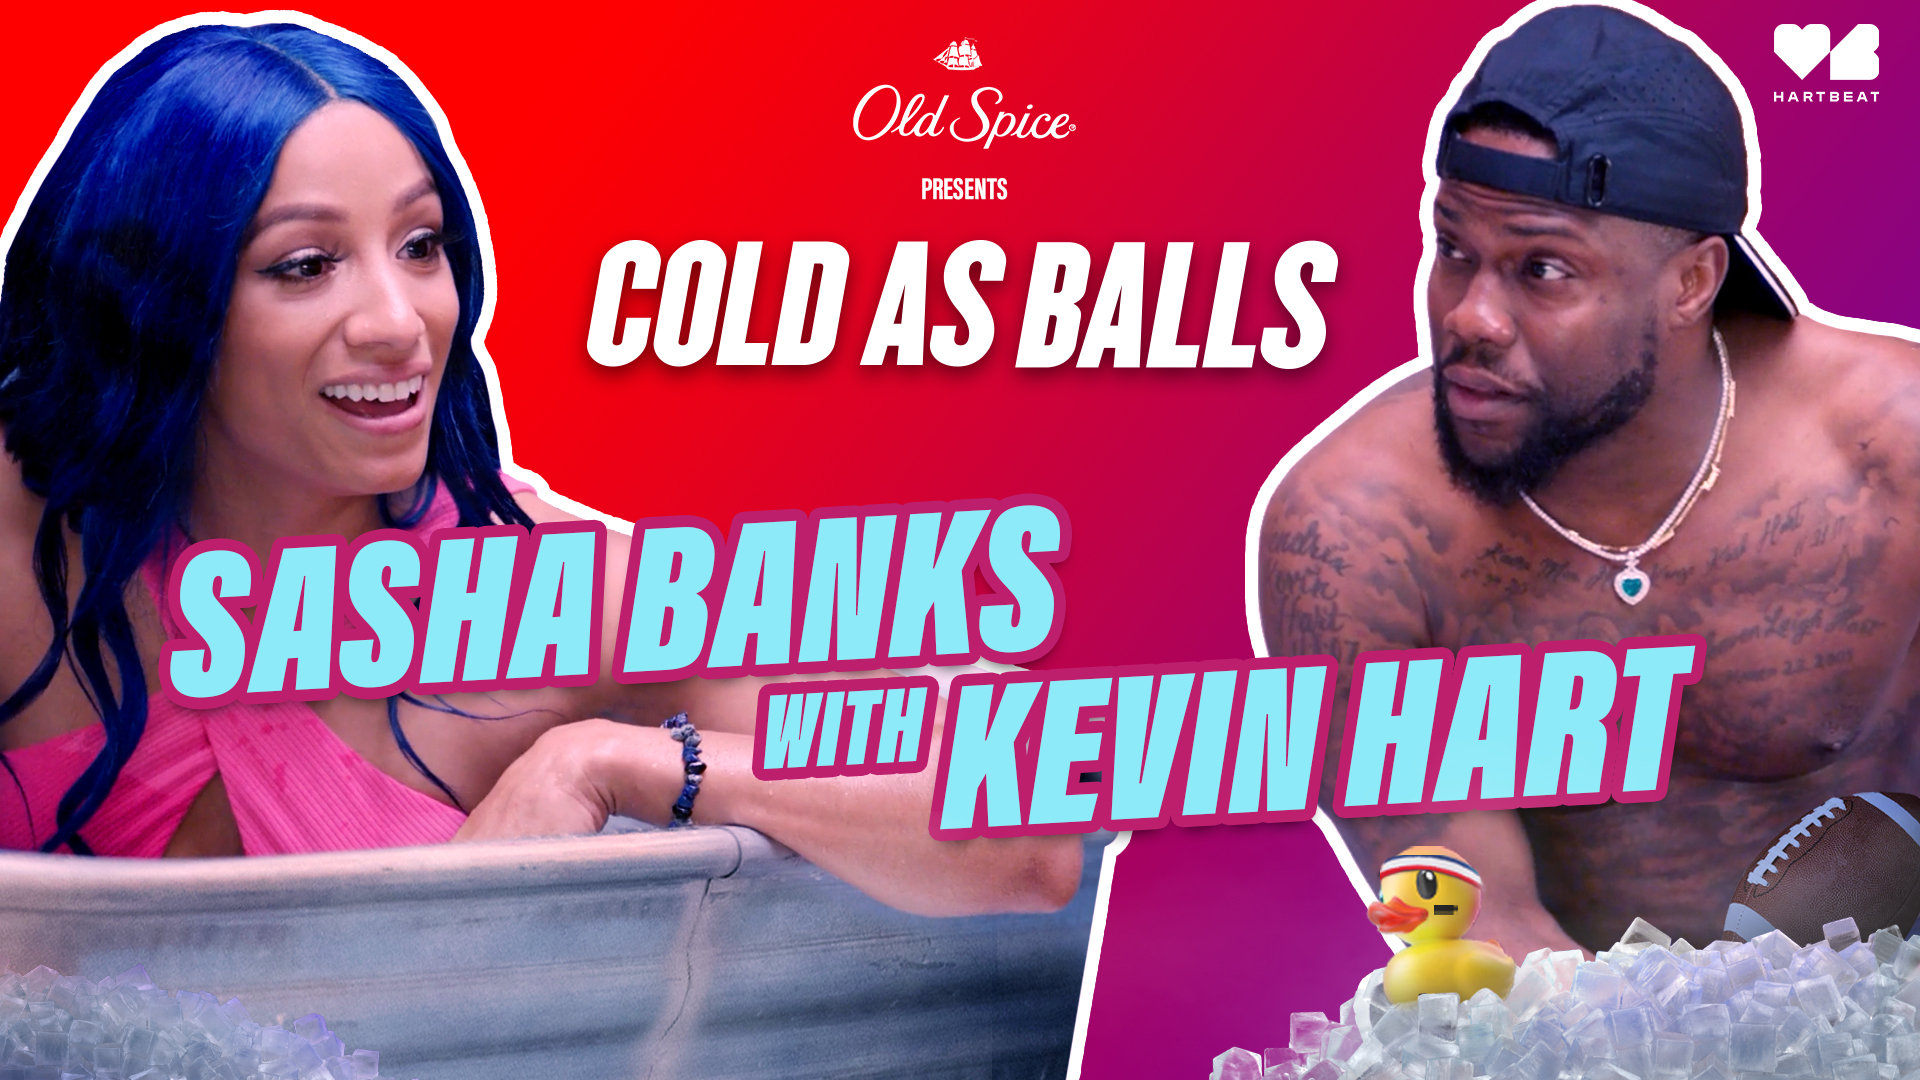 WWE Champion Sasha Banks Talks How She Discovered WWE, Dusty Rhodes, & Takes On Kevin Hart In Lightsaber Battle On LOL Network's “Cold As Balls”